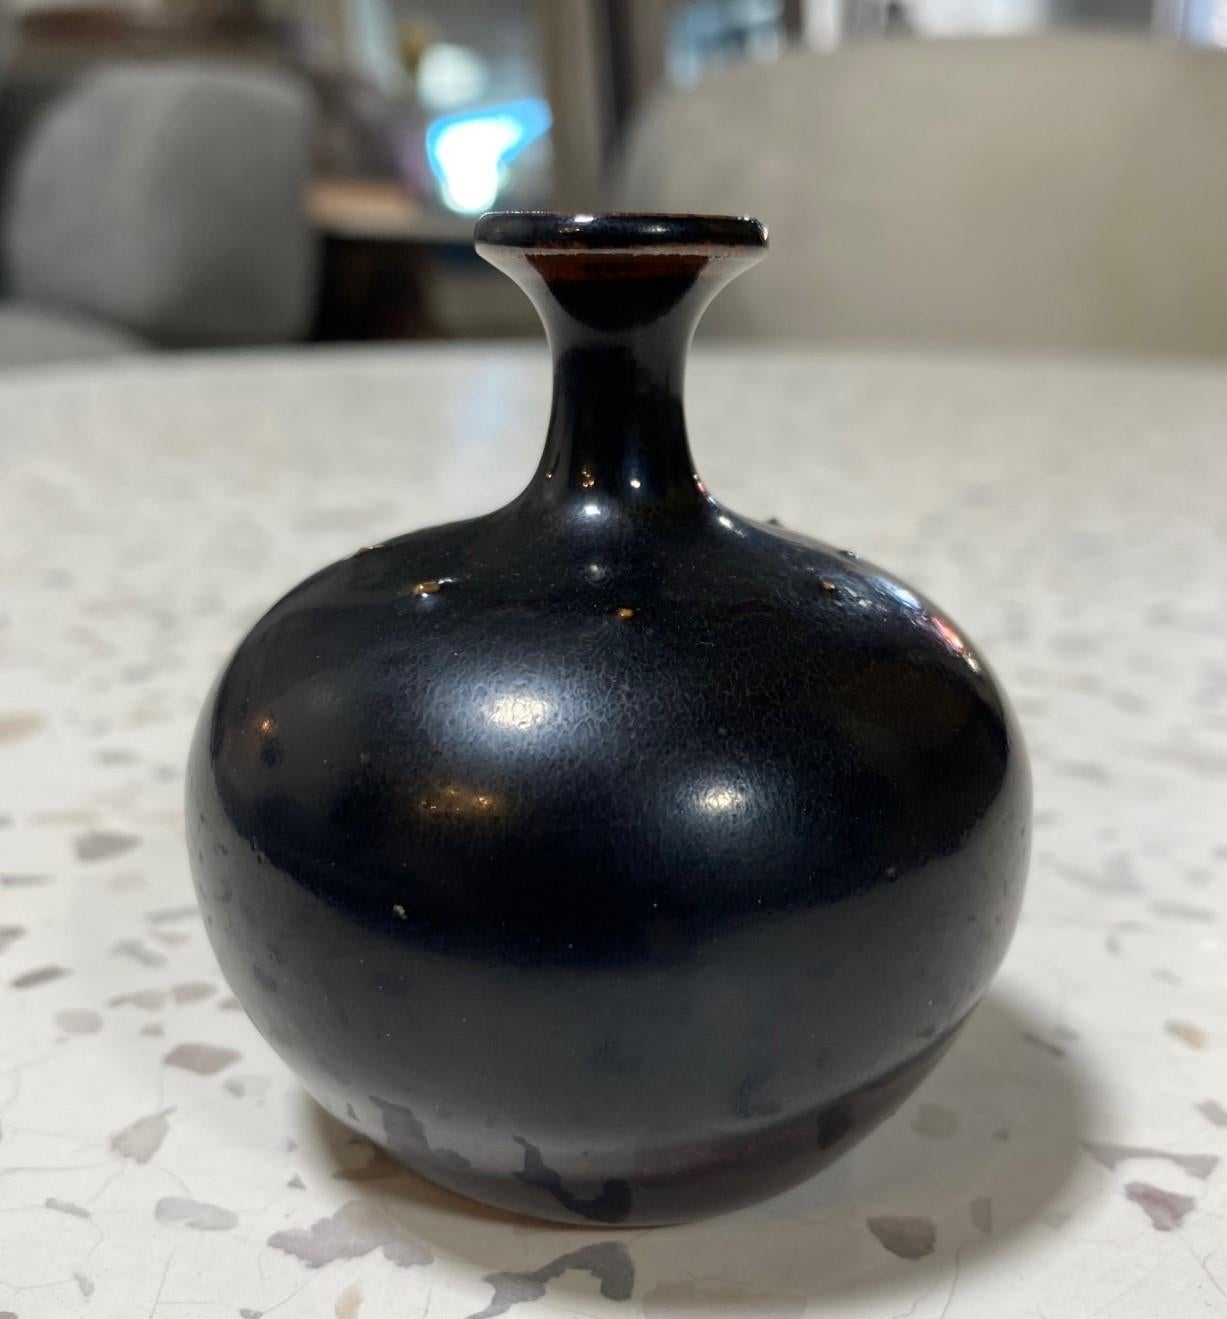 A beautiful and darkly glazed miniature vase by Swedish master ceramicist/designer Rolf Palm for Mölle, Sweden. This gem features a Classic shape with tiny spines and a rich glaze that radiates and changes colors (blacks, browns, with a tinge of